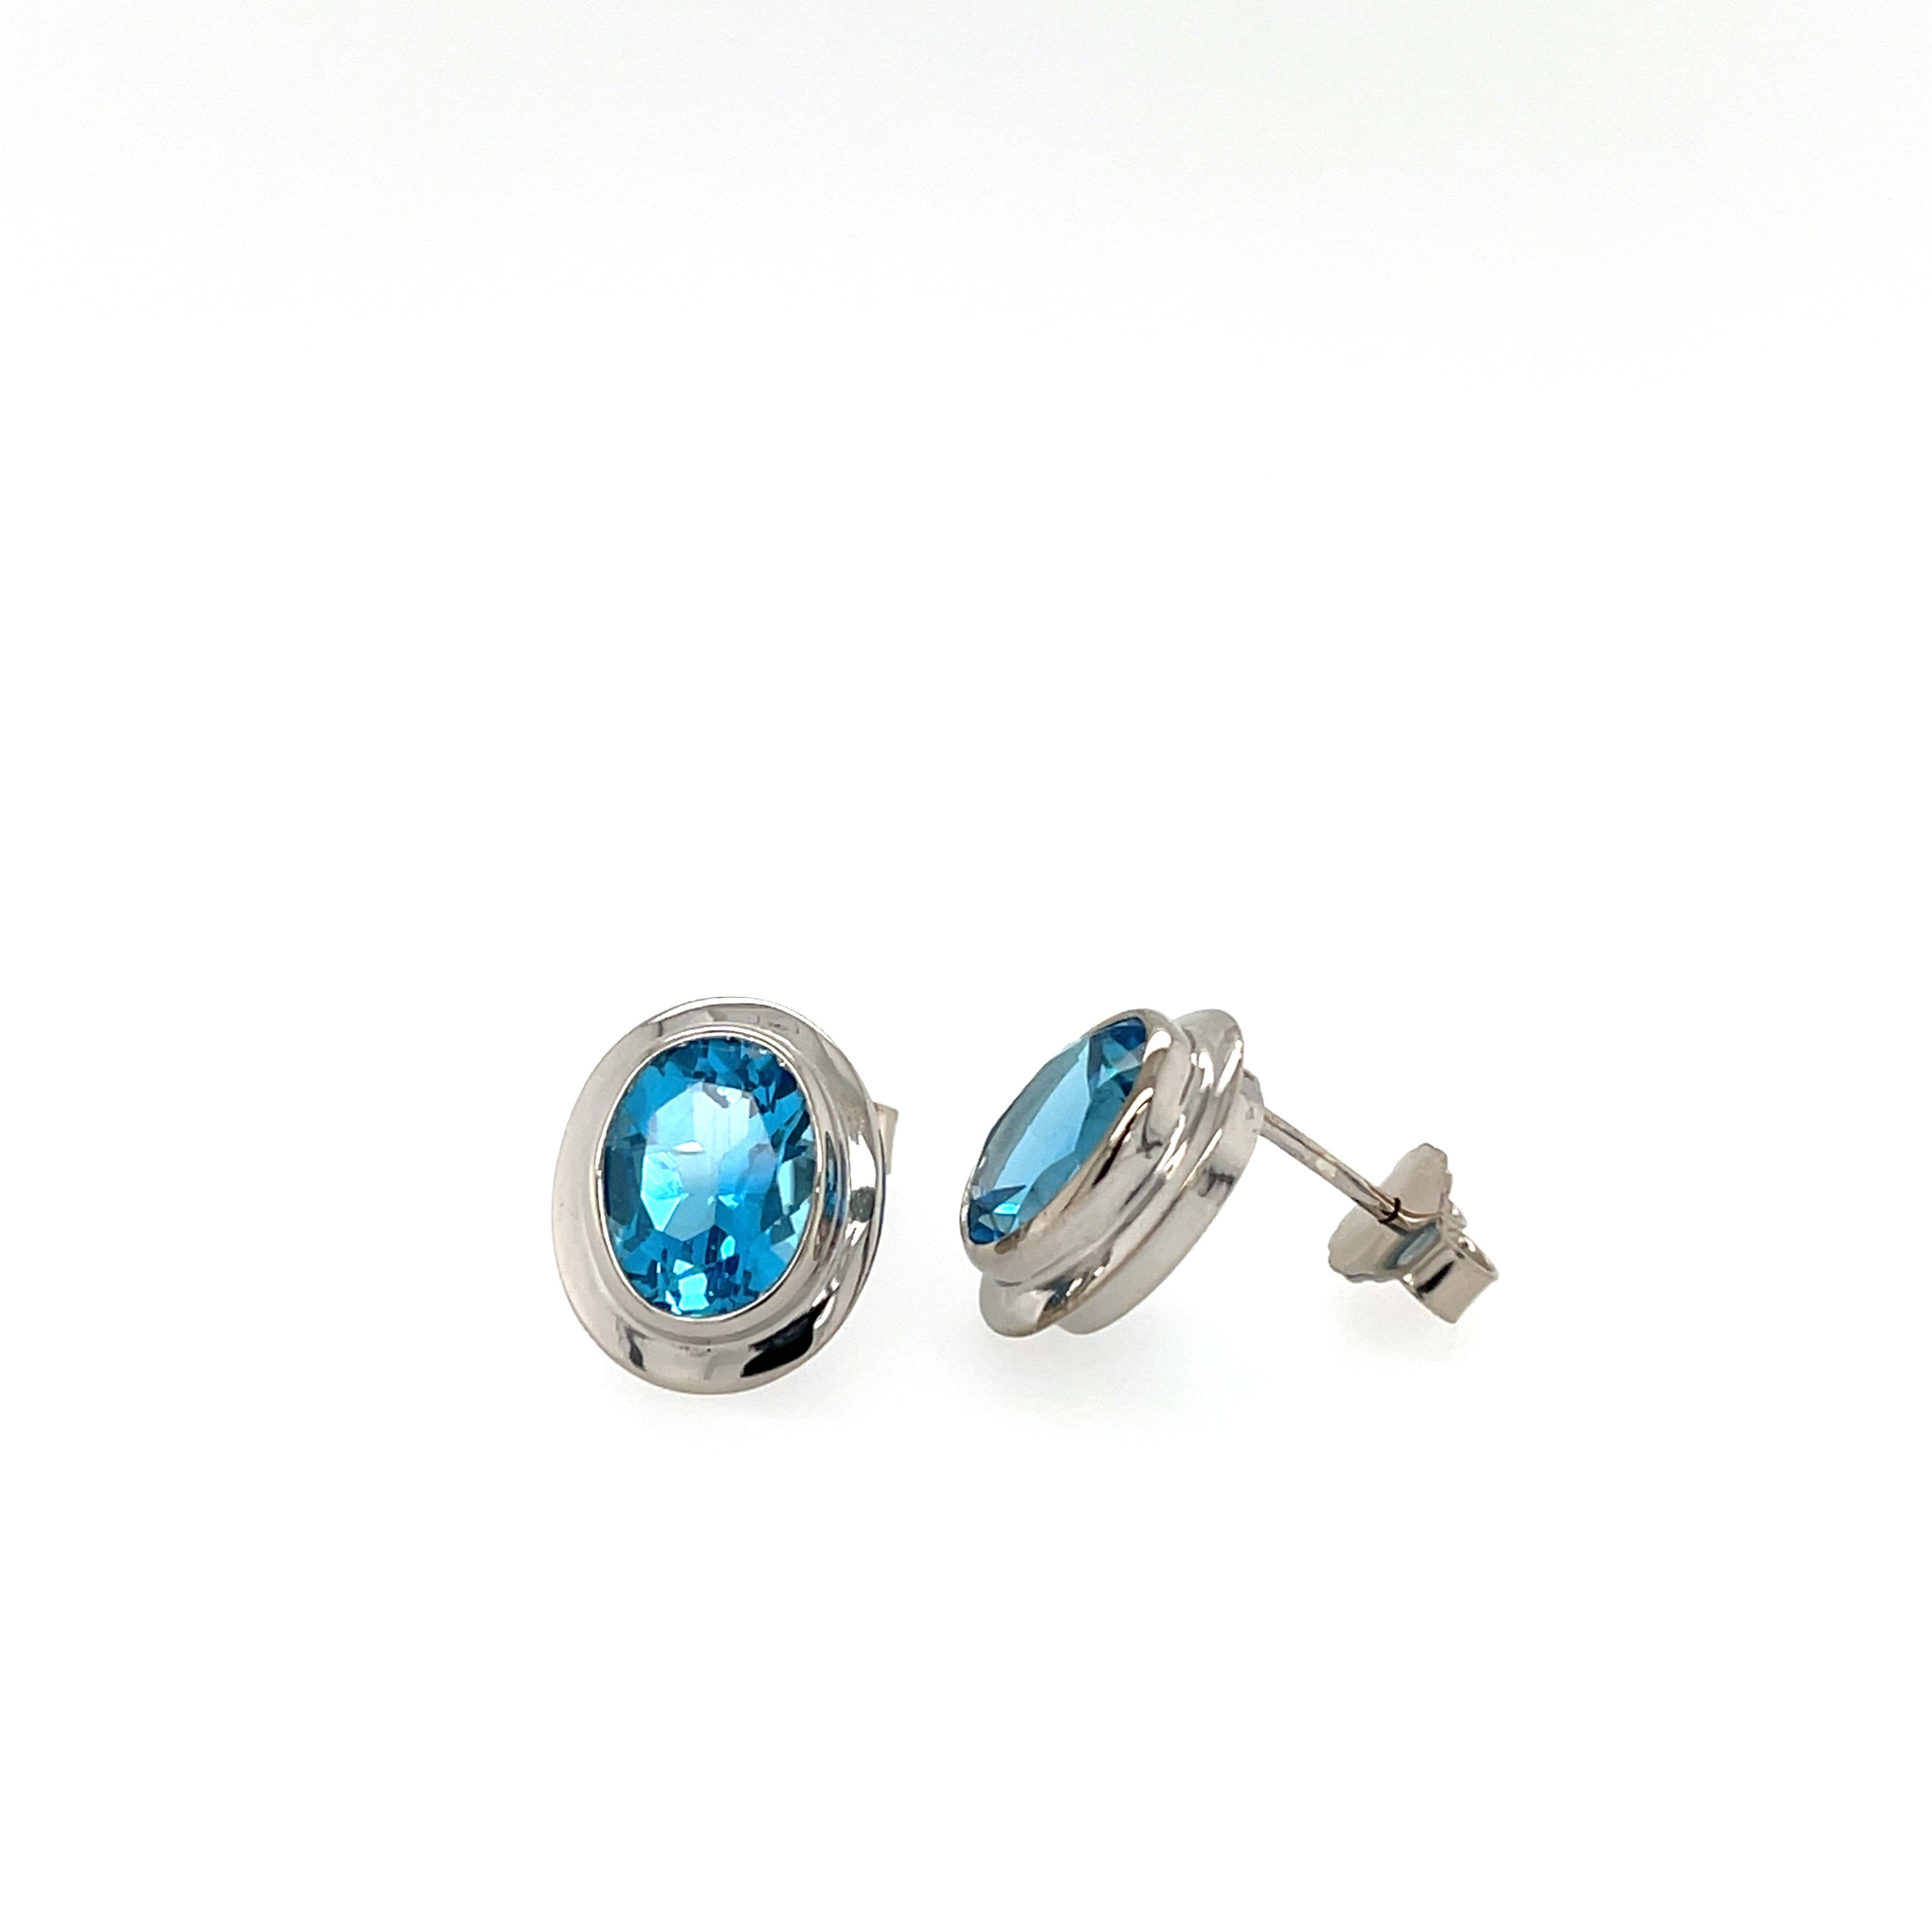 18ct White Gold 6.80ct Oval Blue Topaz Stud Earrings